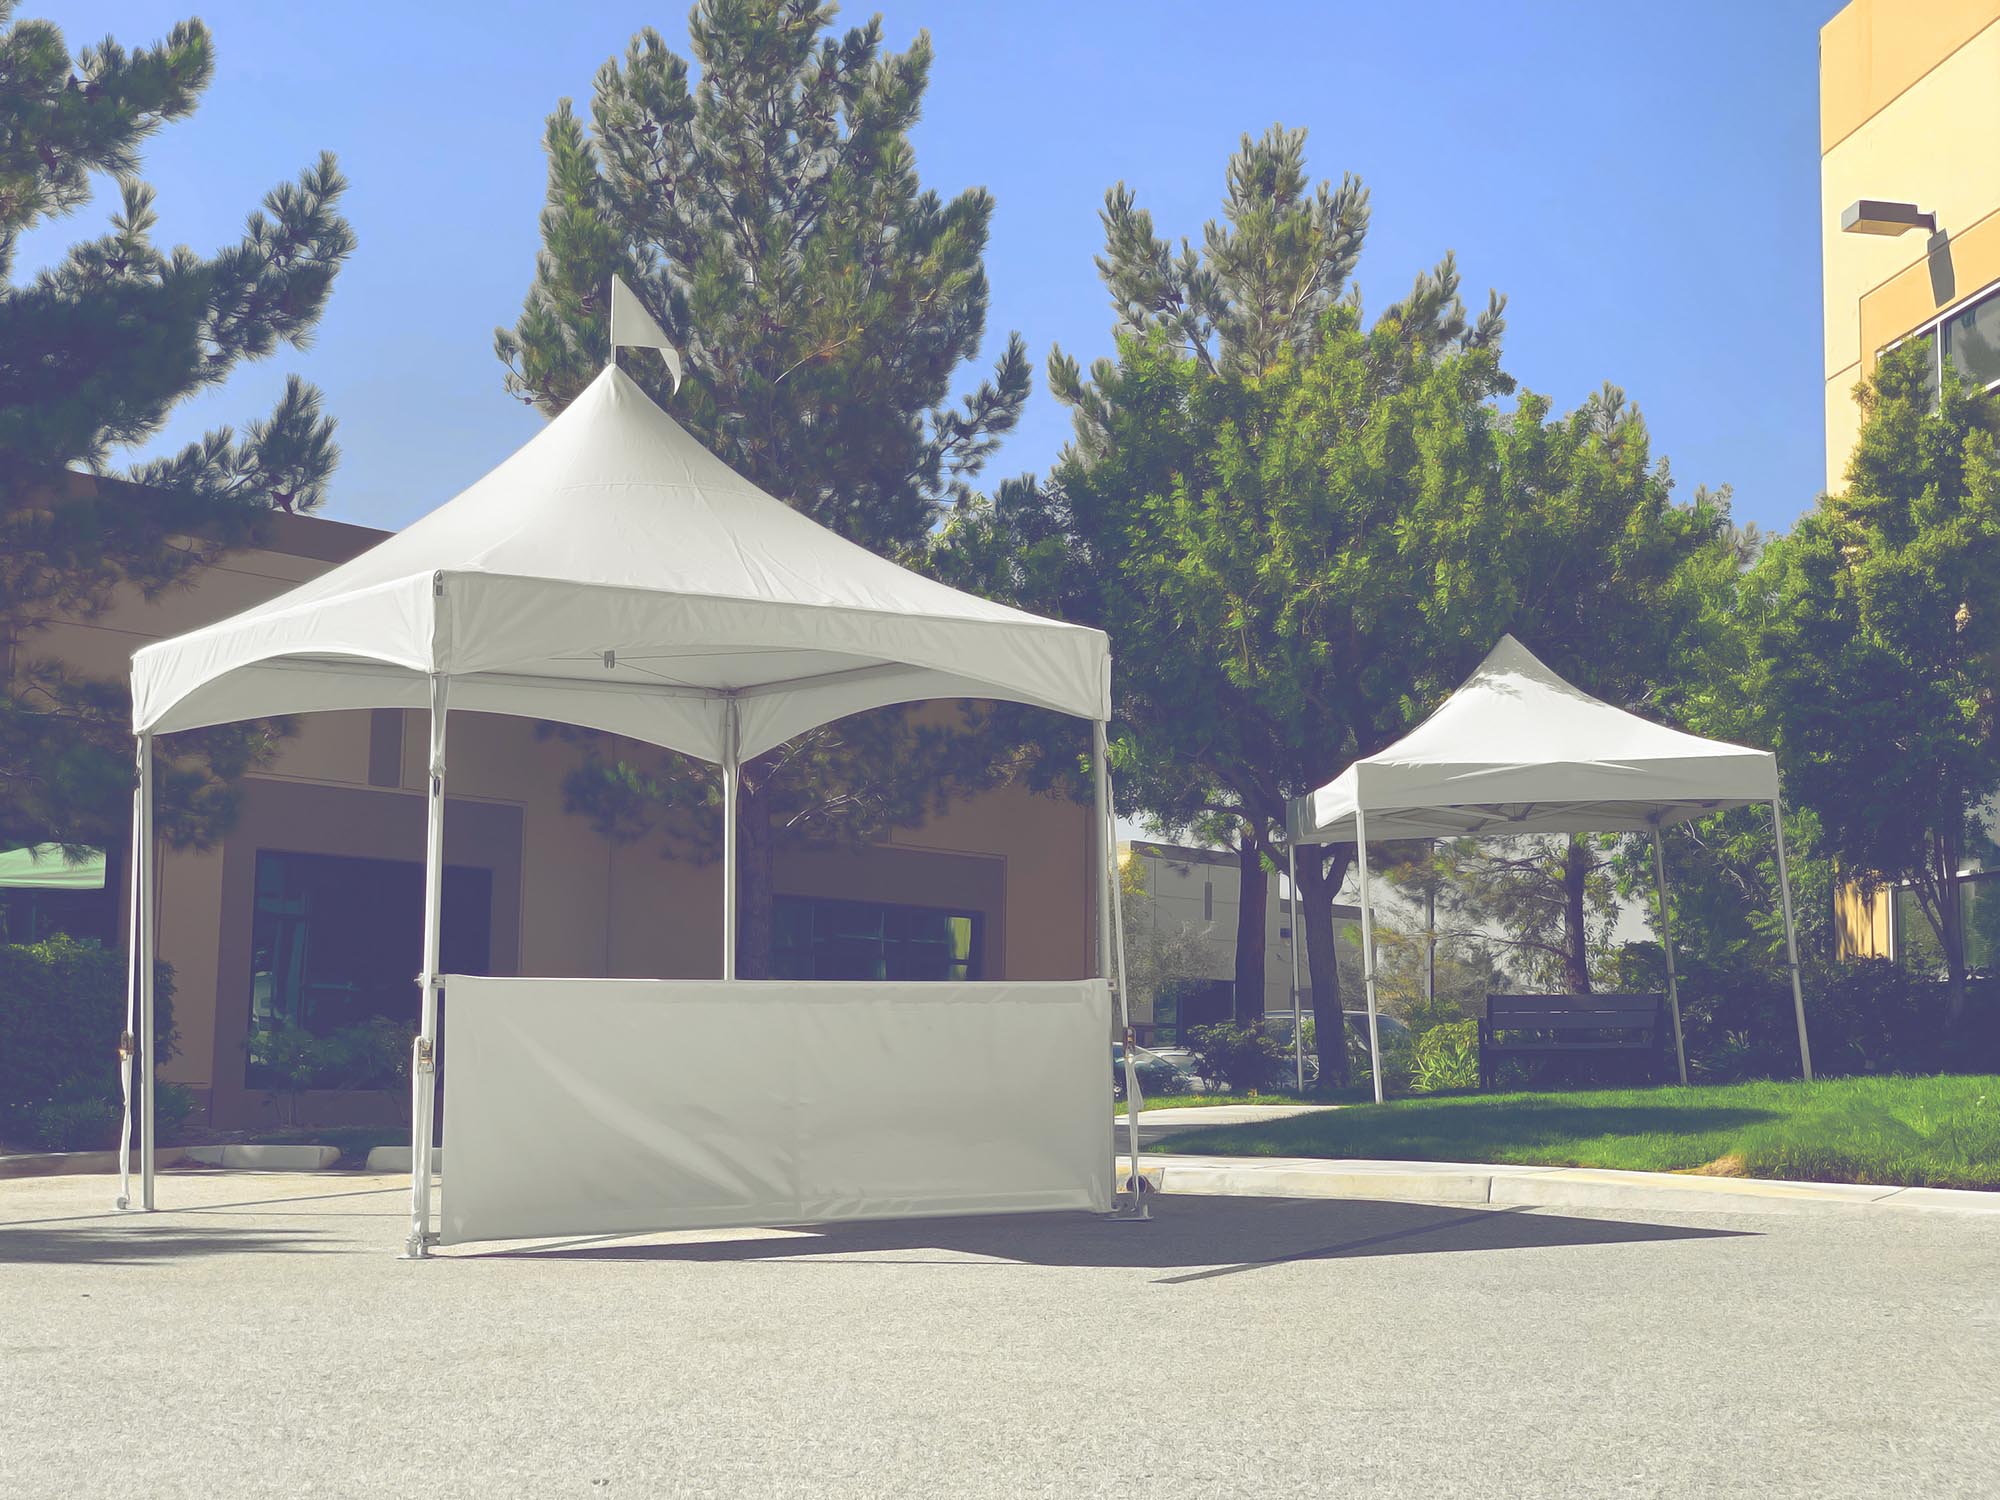 Central Tent